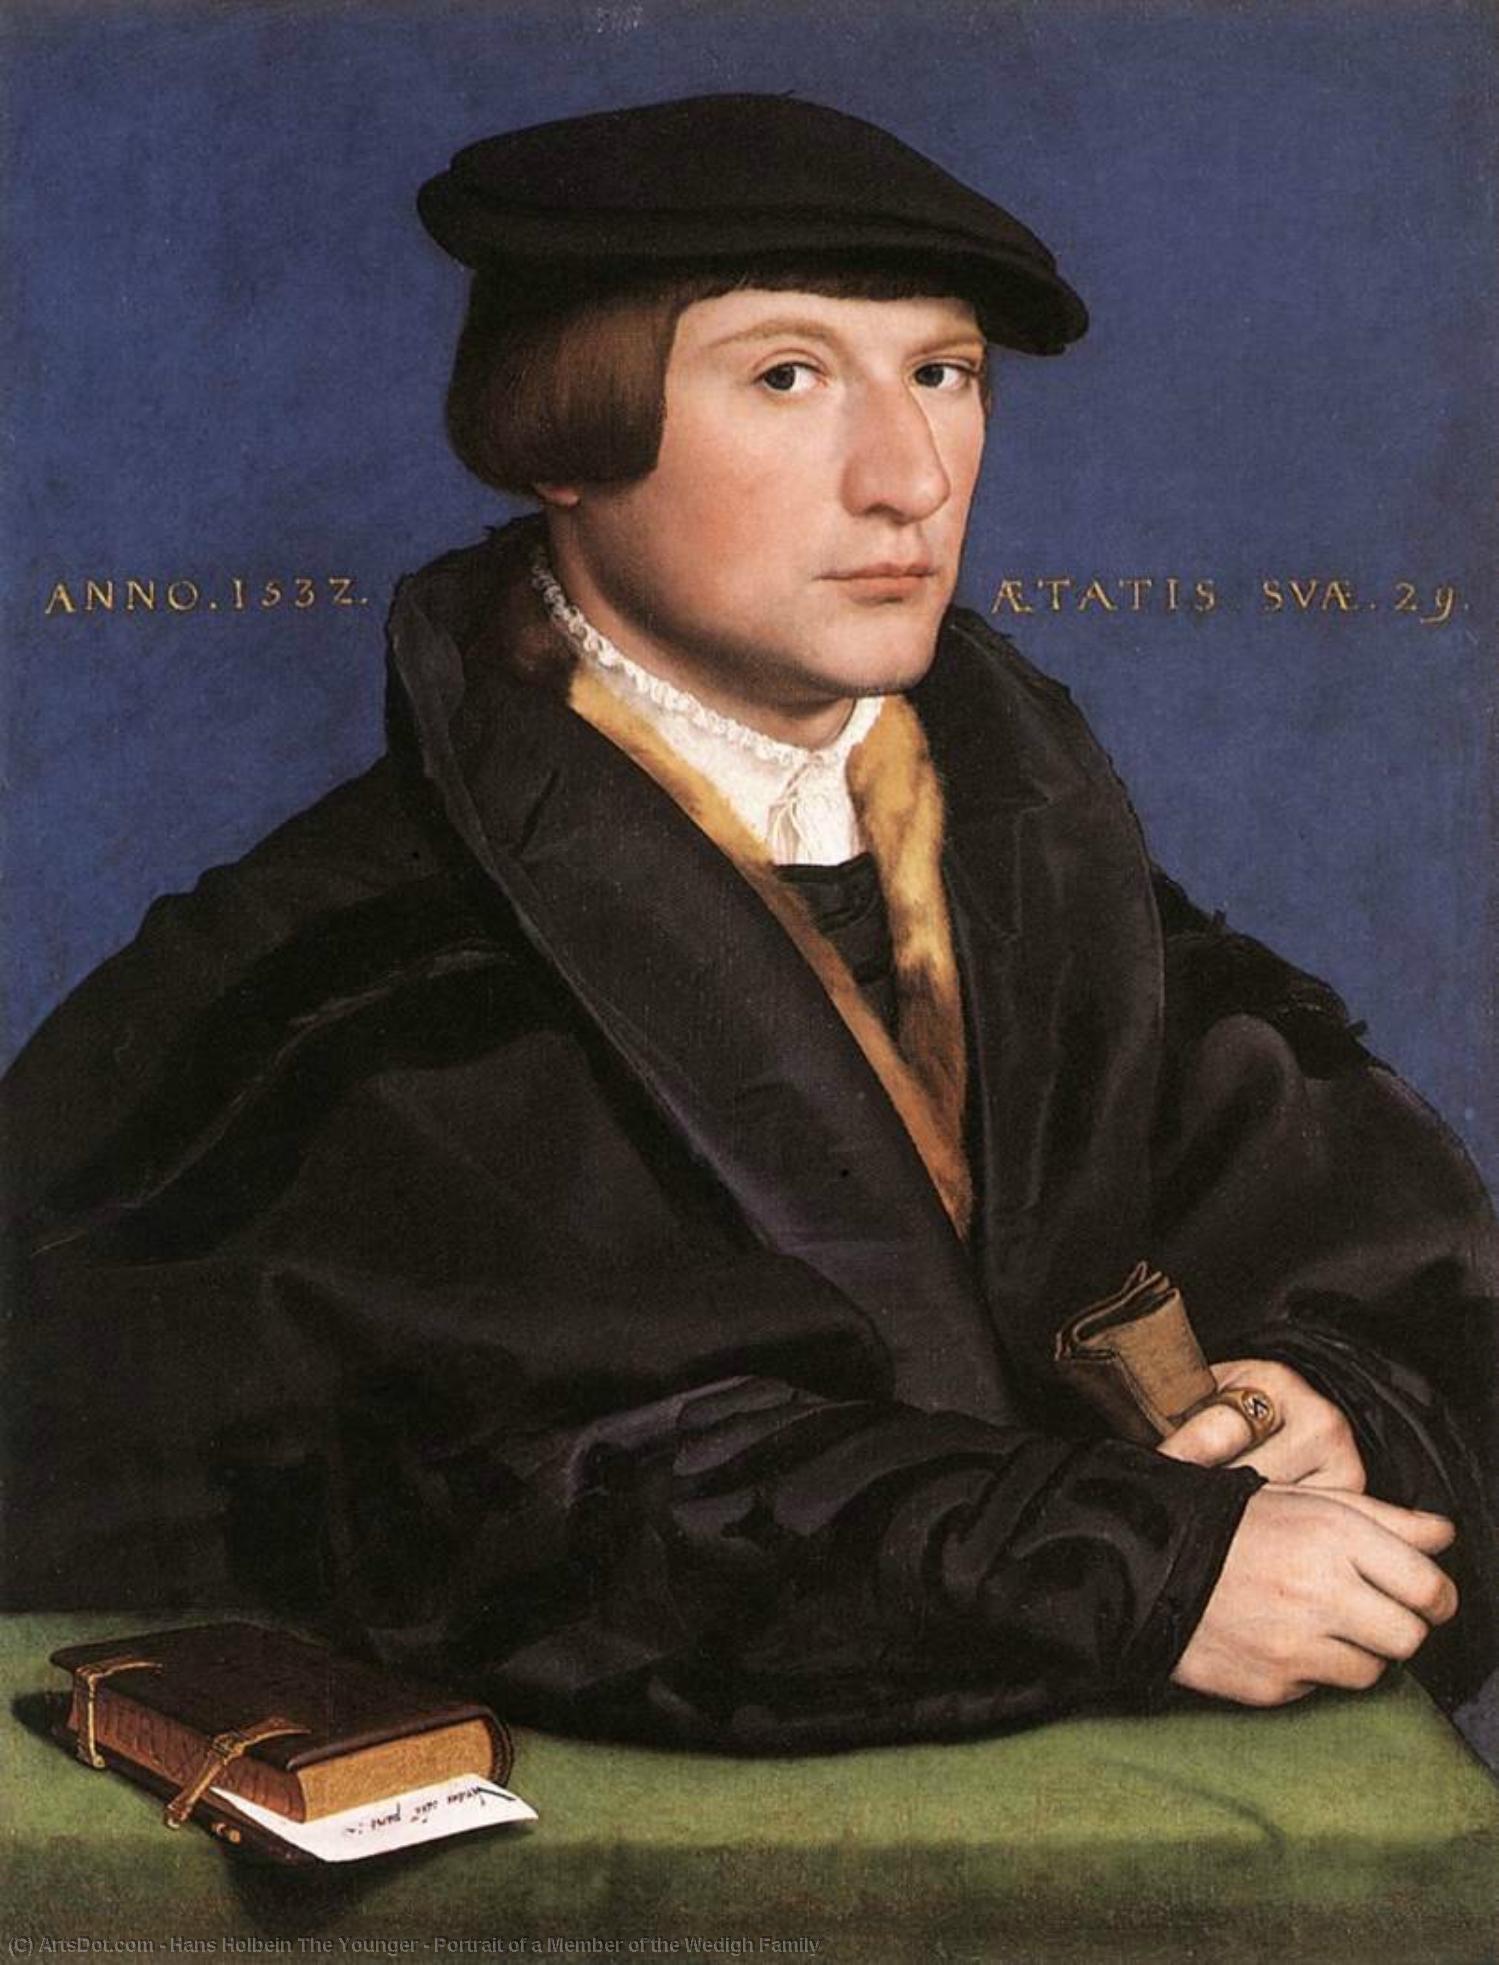 WikiOO.org - دایره المعارف هنرهای زیبا - نقاشی، آثار هنری Hans Holbein The Younger - Portrait of a Member of the Wedigh Family